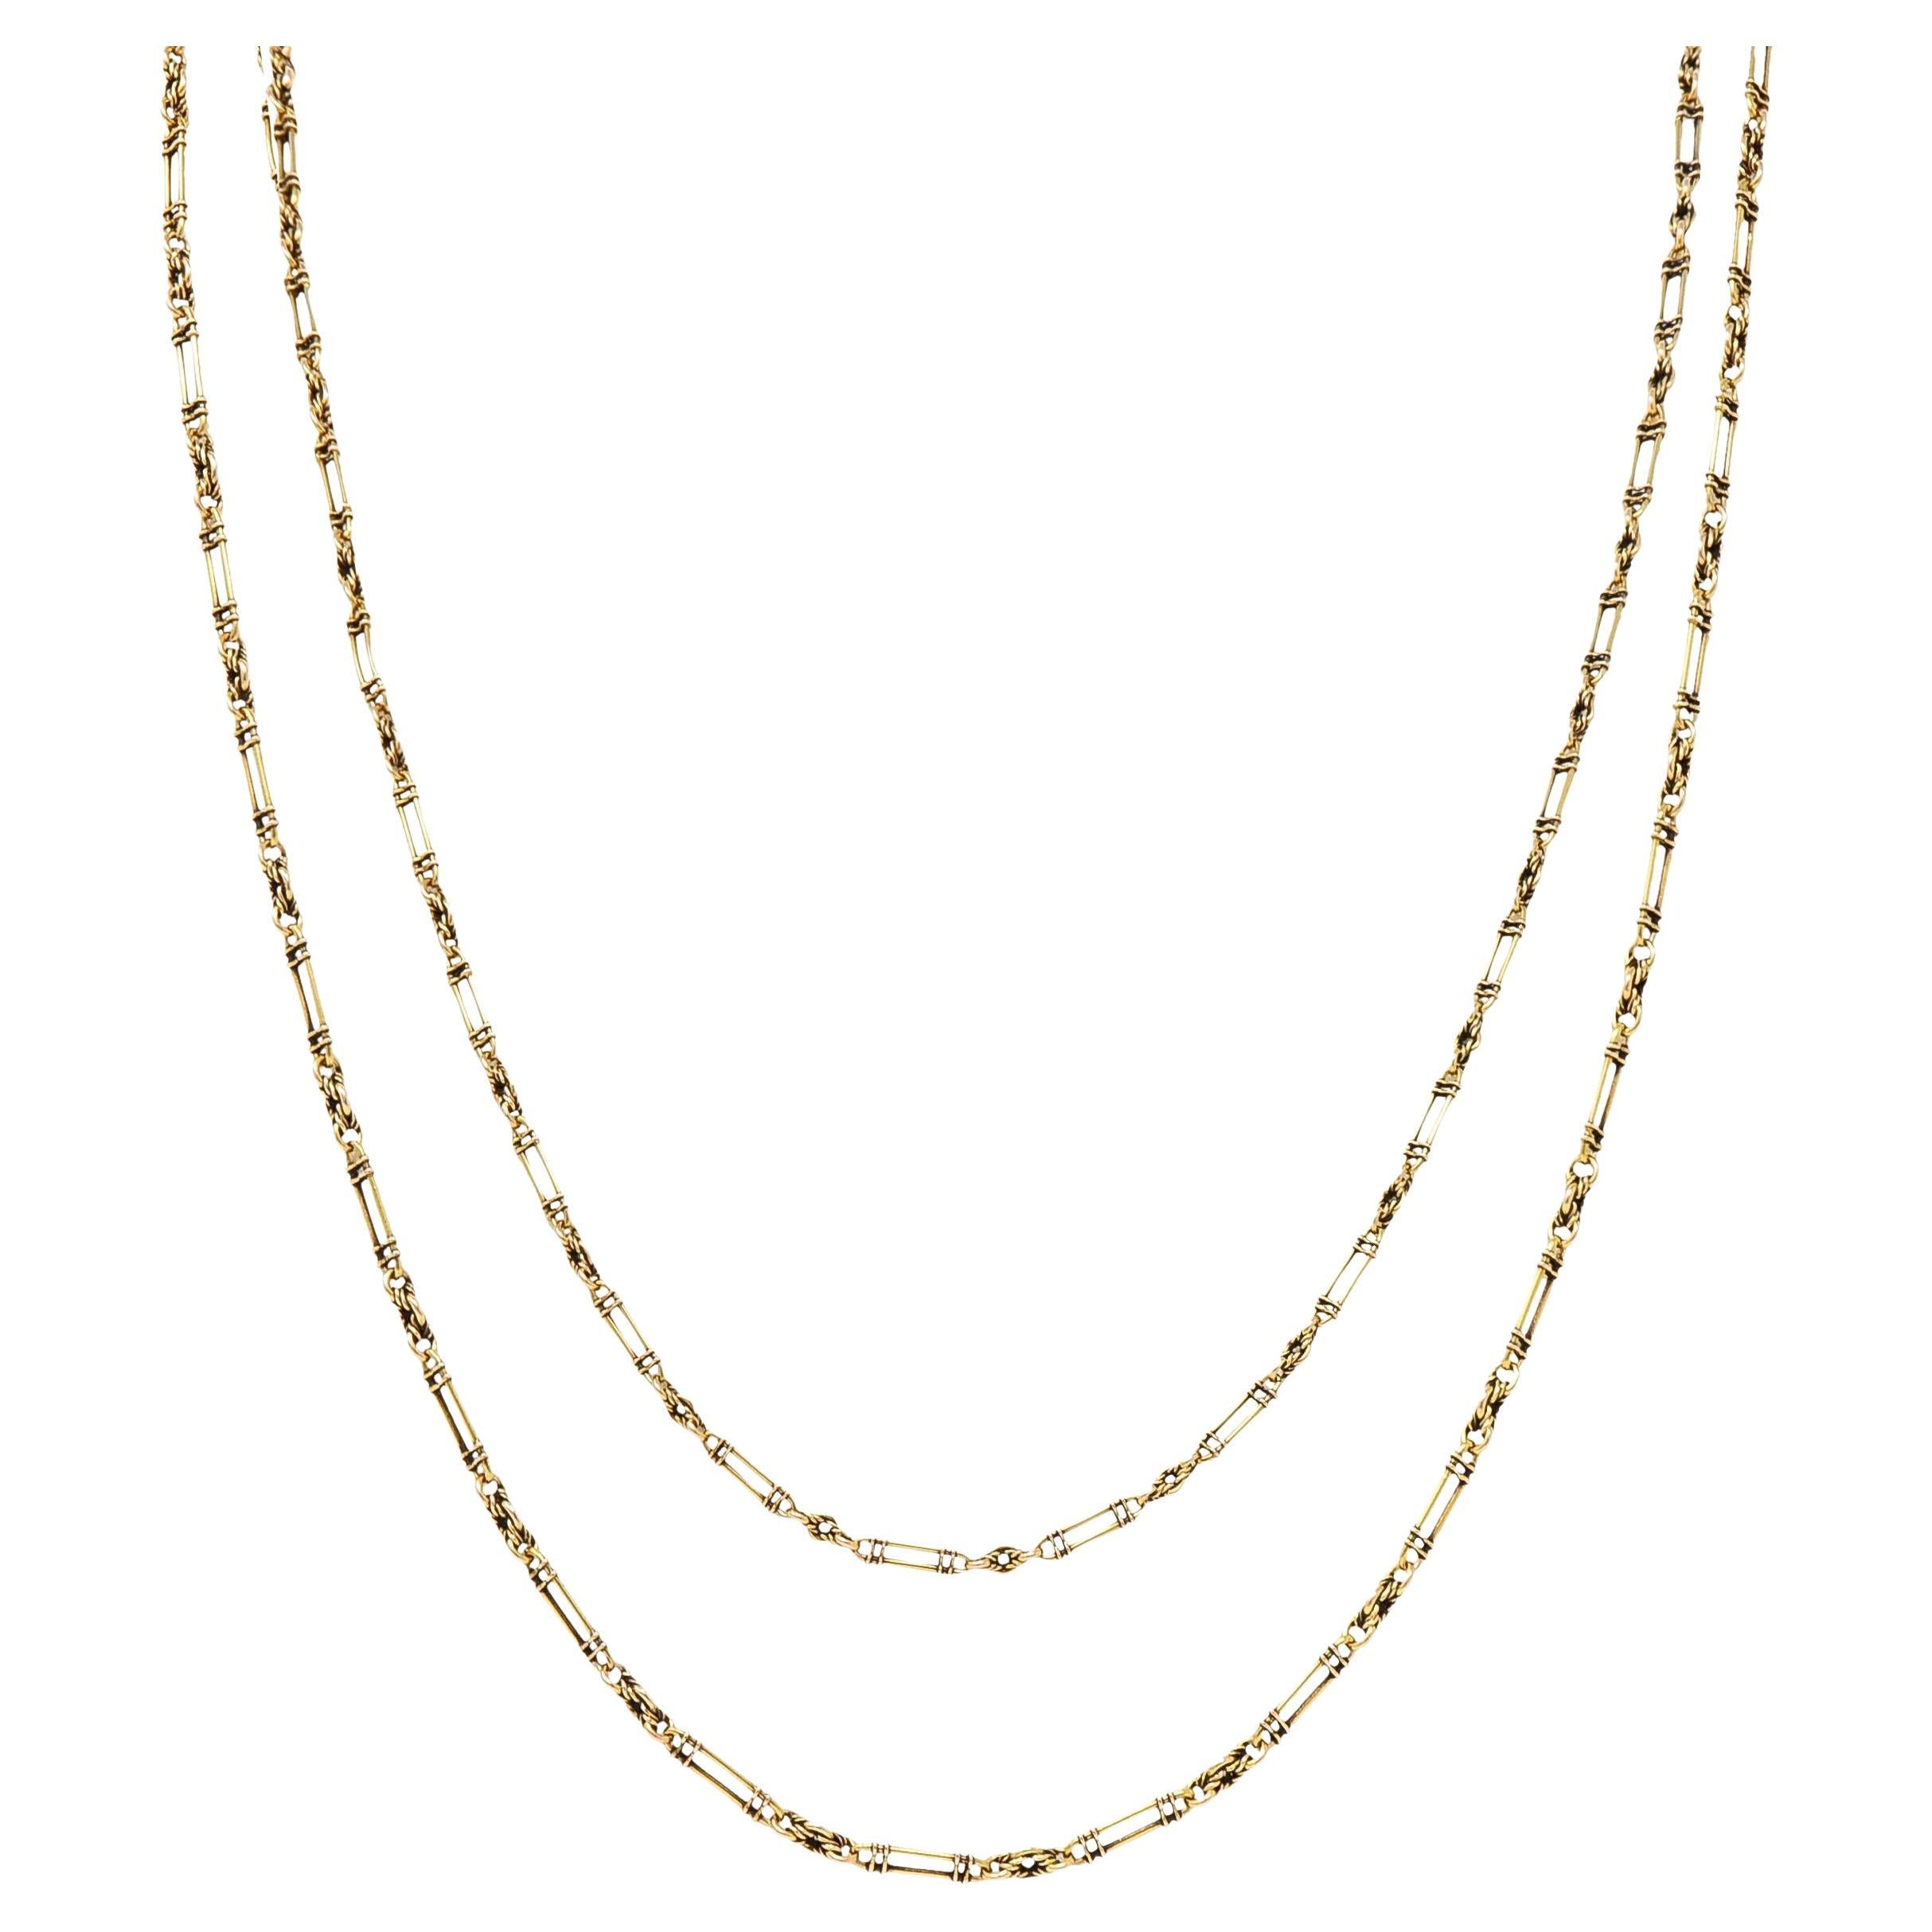 Victorian 15 Karat Yellow Gold Elongated Oval Link Antique Chain Necklace For Sale